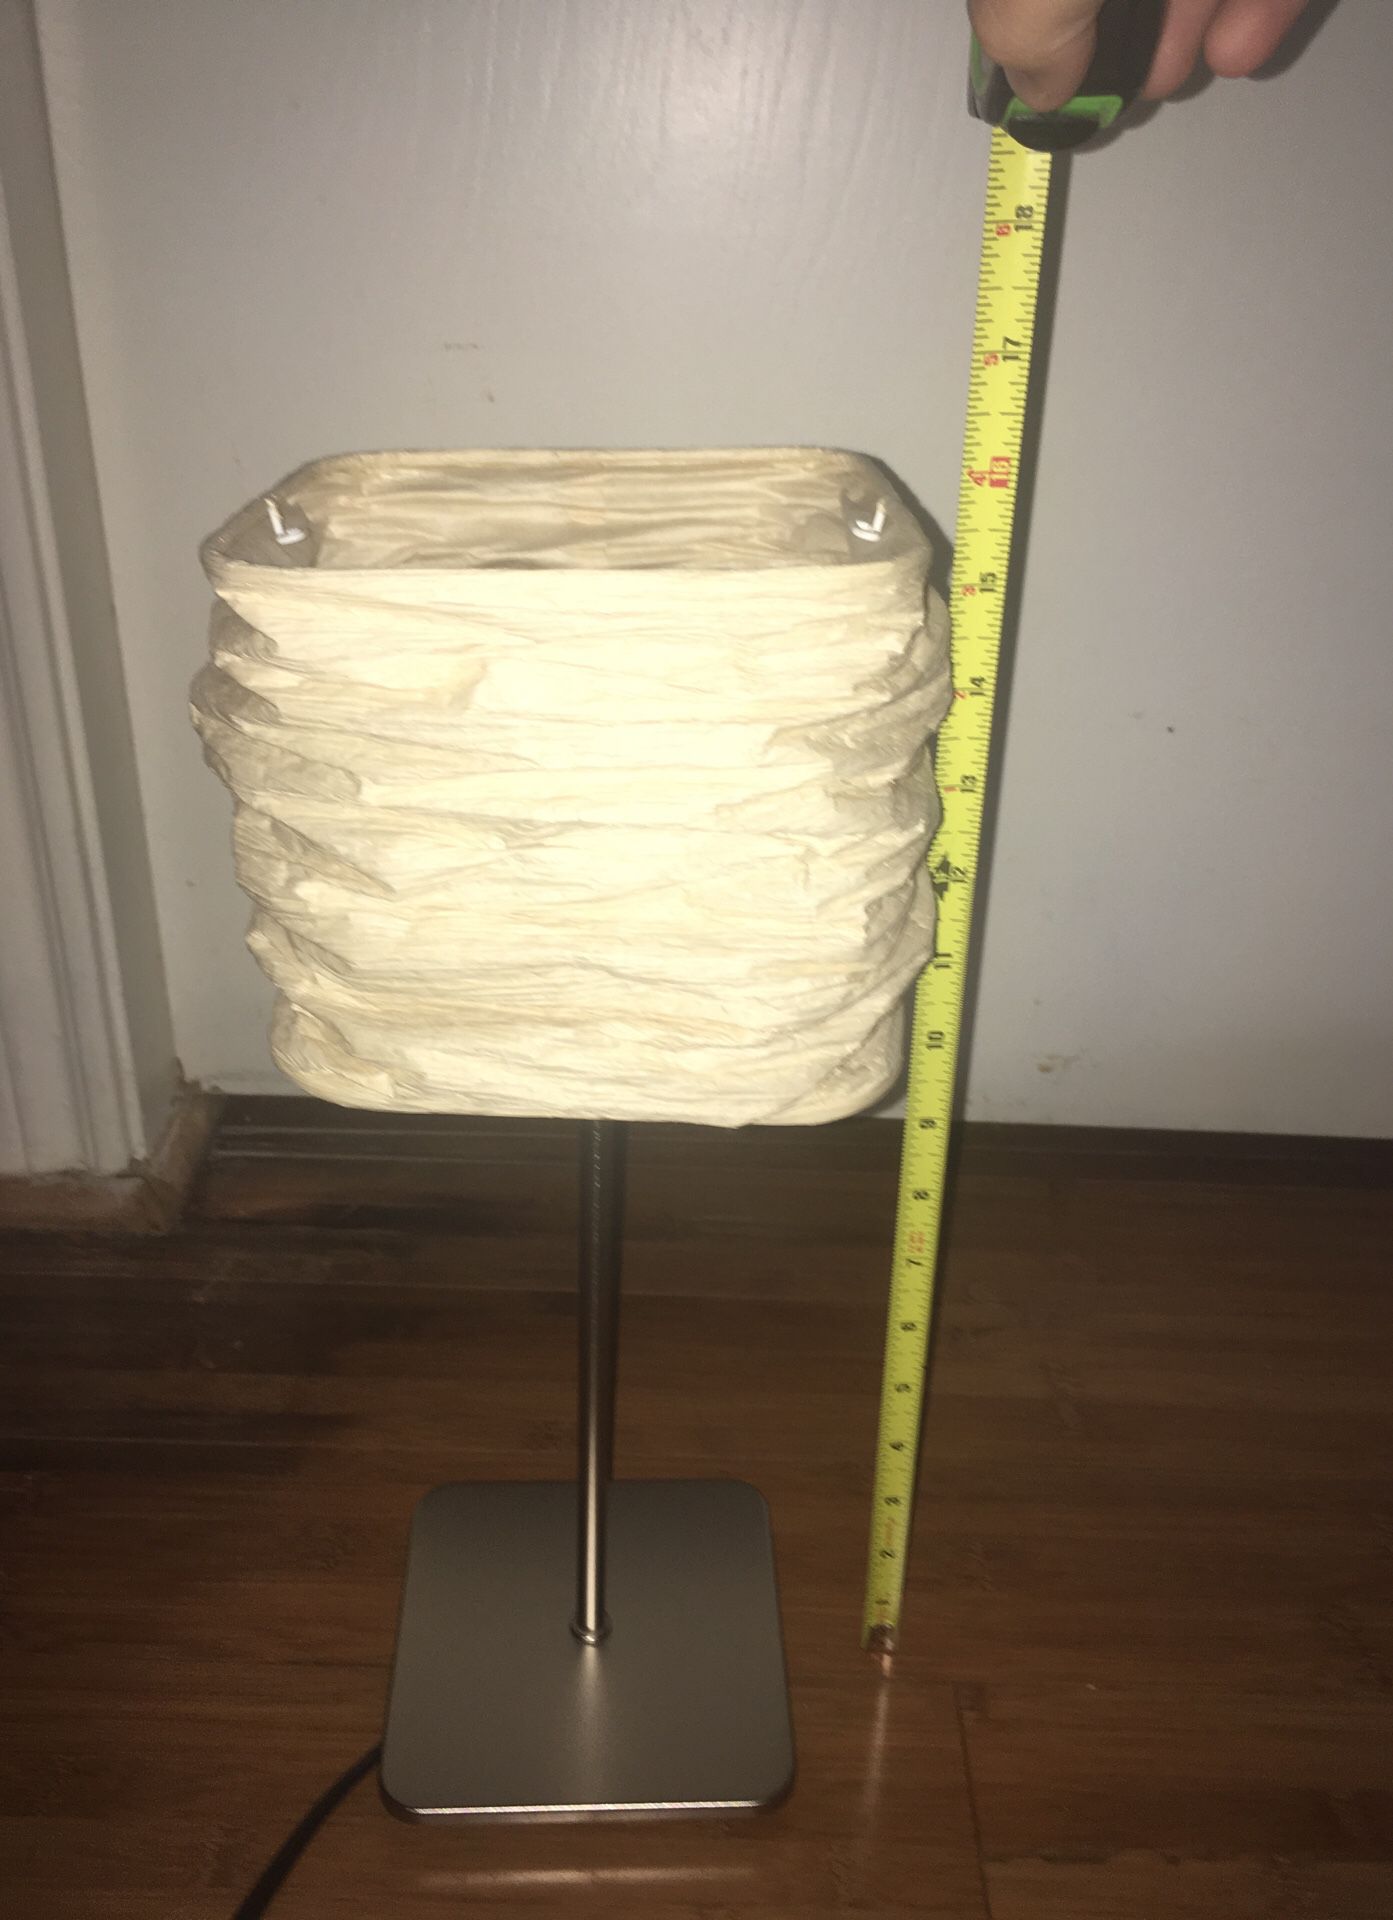 Modern Desk Lamp with durable paper cover